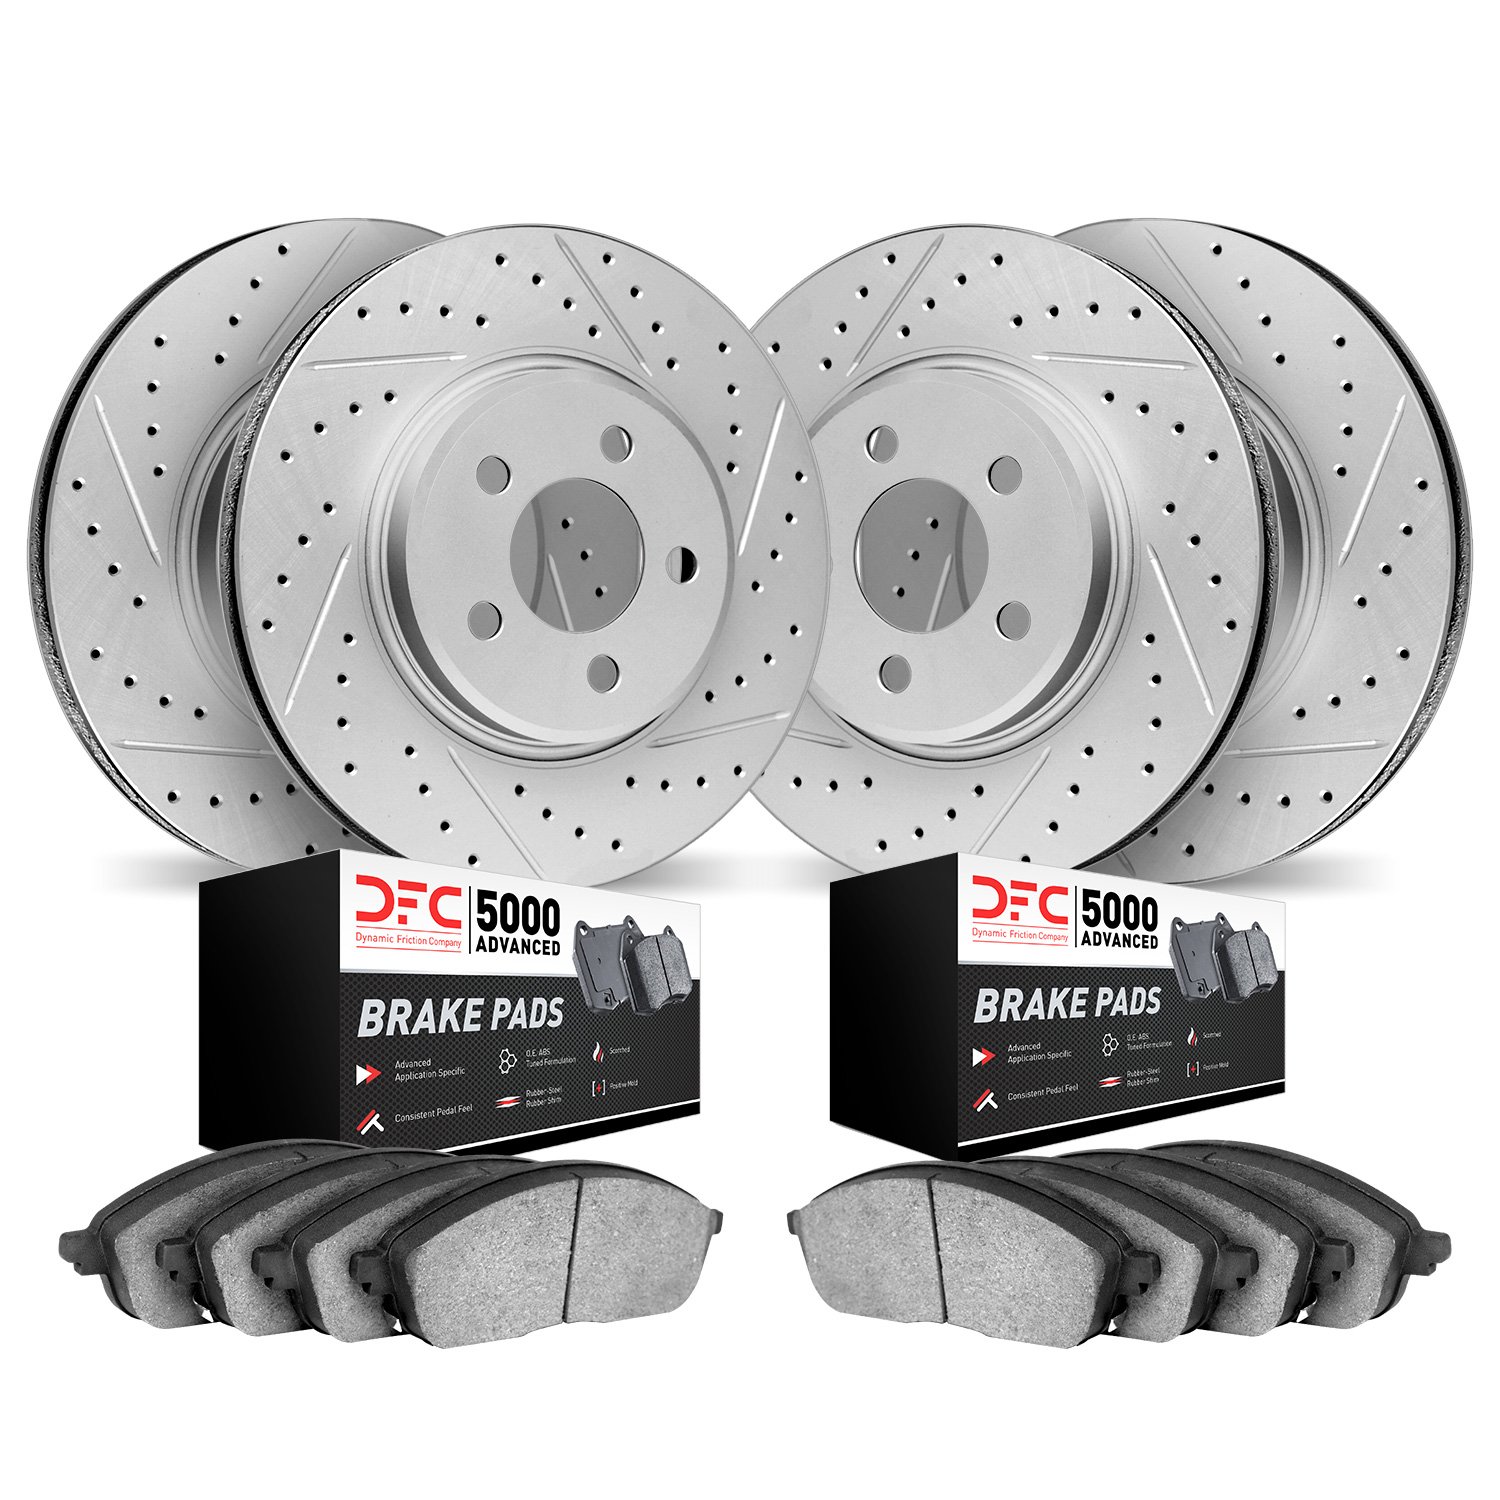 2504-27003 Geoperformance Drilled/Slotted Rotors w/5000 Advanced Brake Pads Kit, 2004-2007 Volvo, Position: Front and Rear